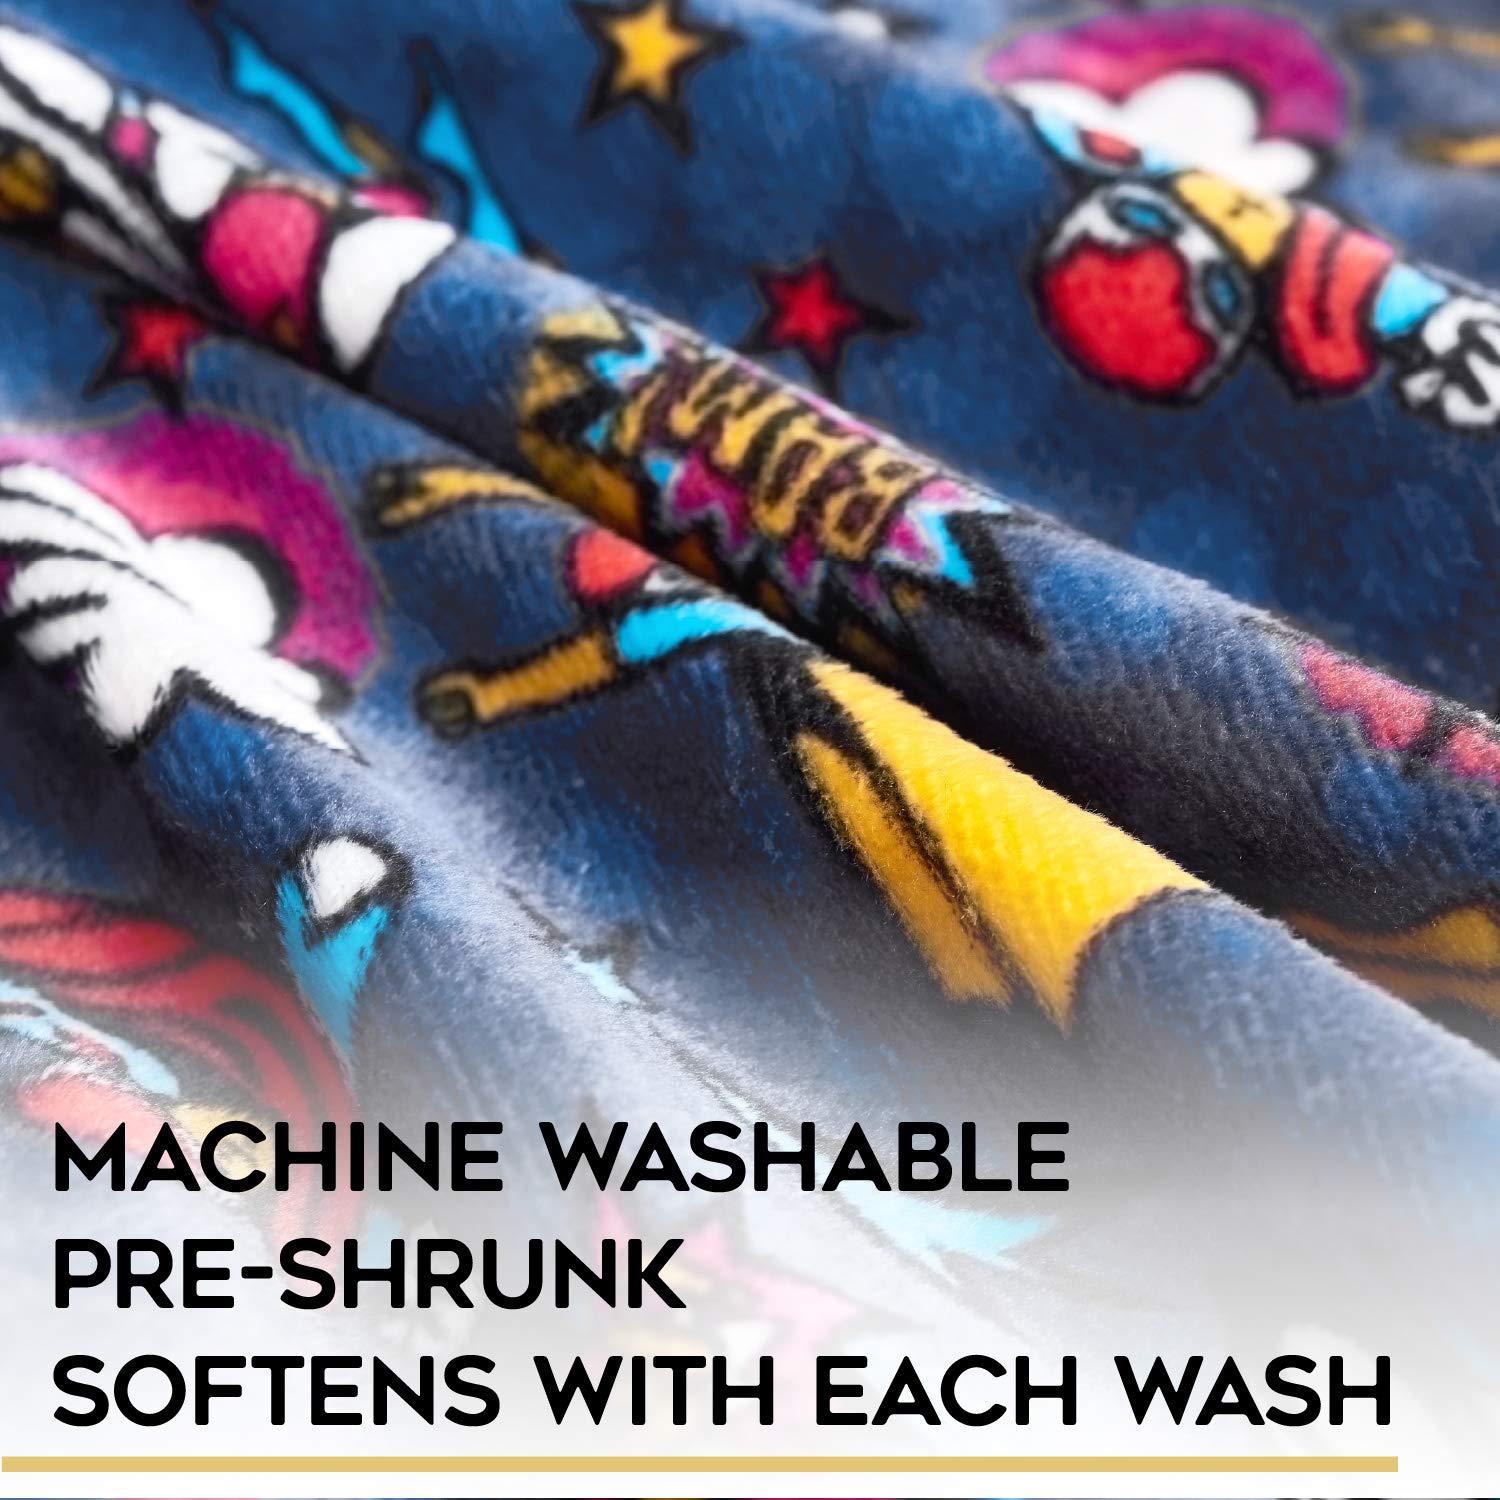 our winter blanket is machine washable pre-shrunk material which softens with each wash